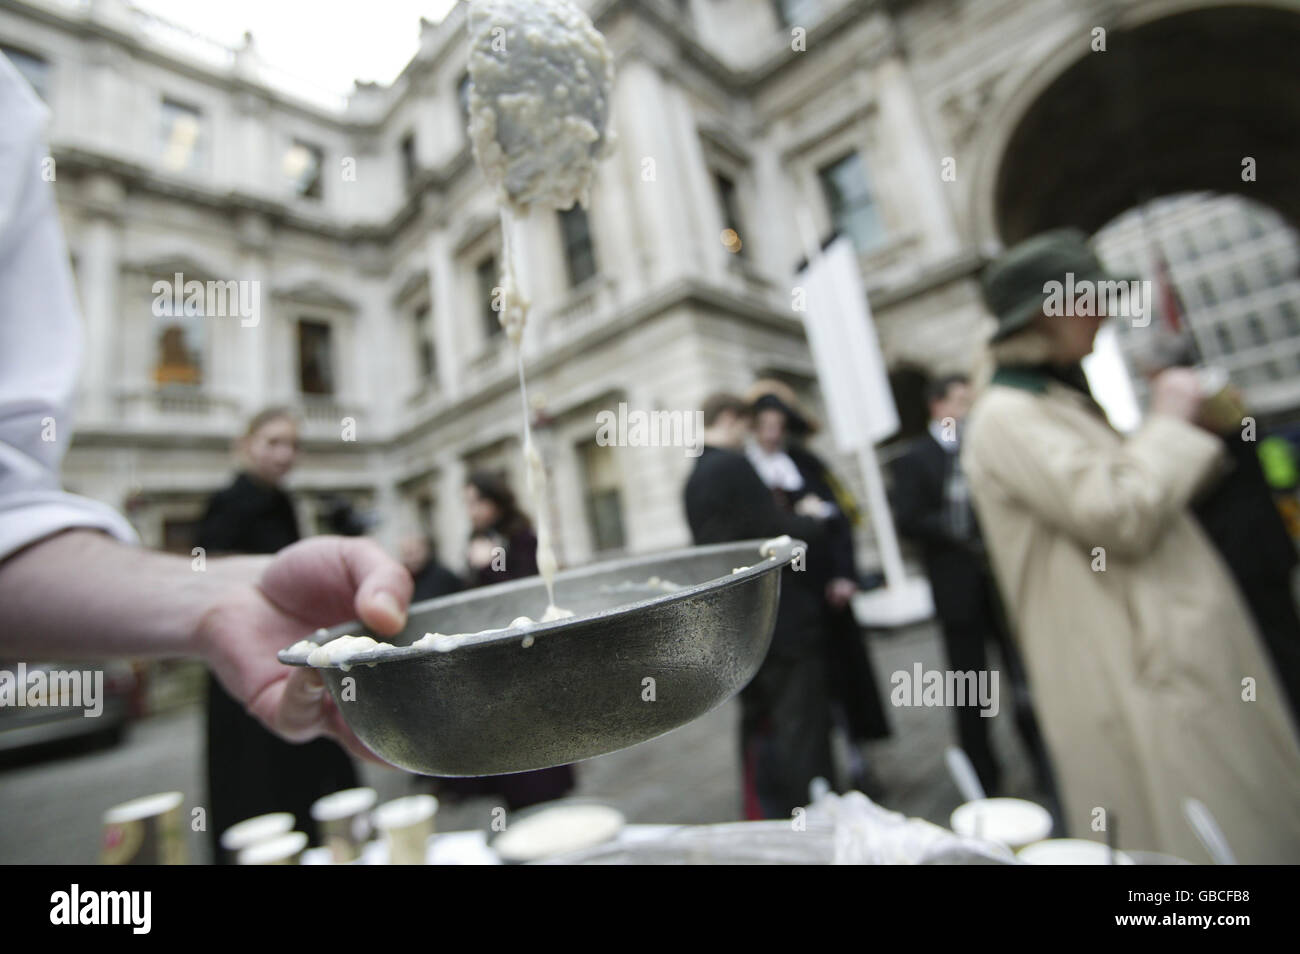 French Chef Fabian Aid serves Victorian workhouse gruel to members of the public at Burlington House on Piccadilly, London, as part of the Royal Society of Chemistry's 2009 theme of food. Stock Photo